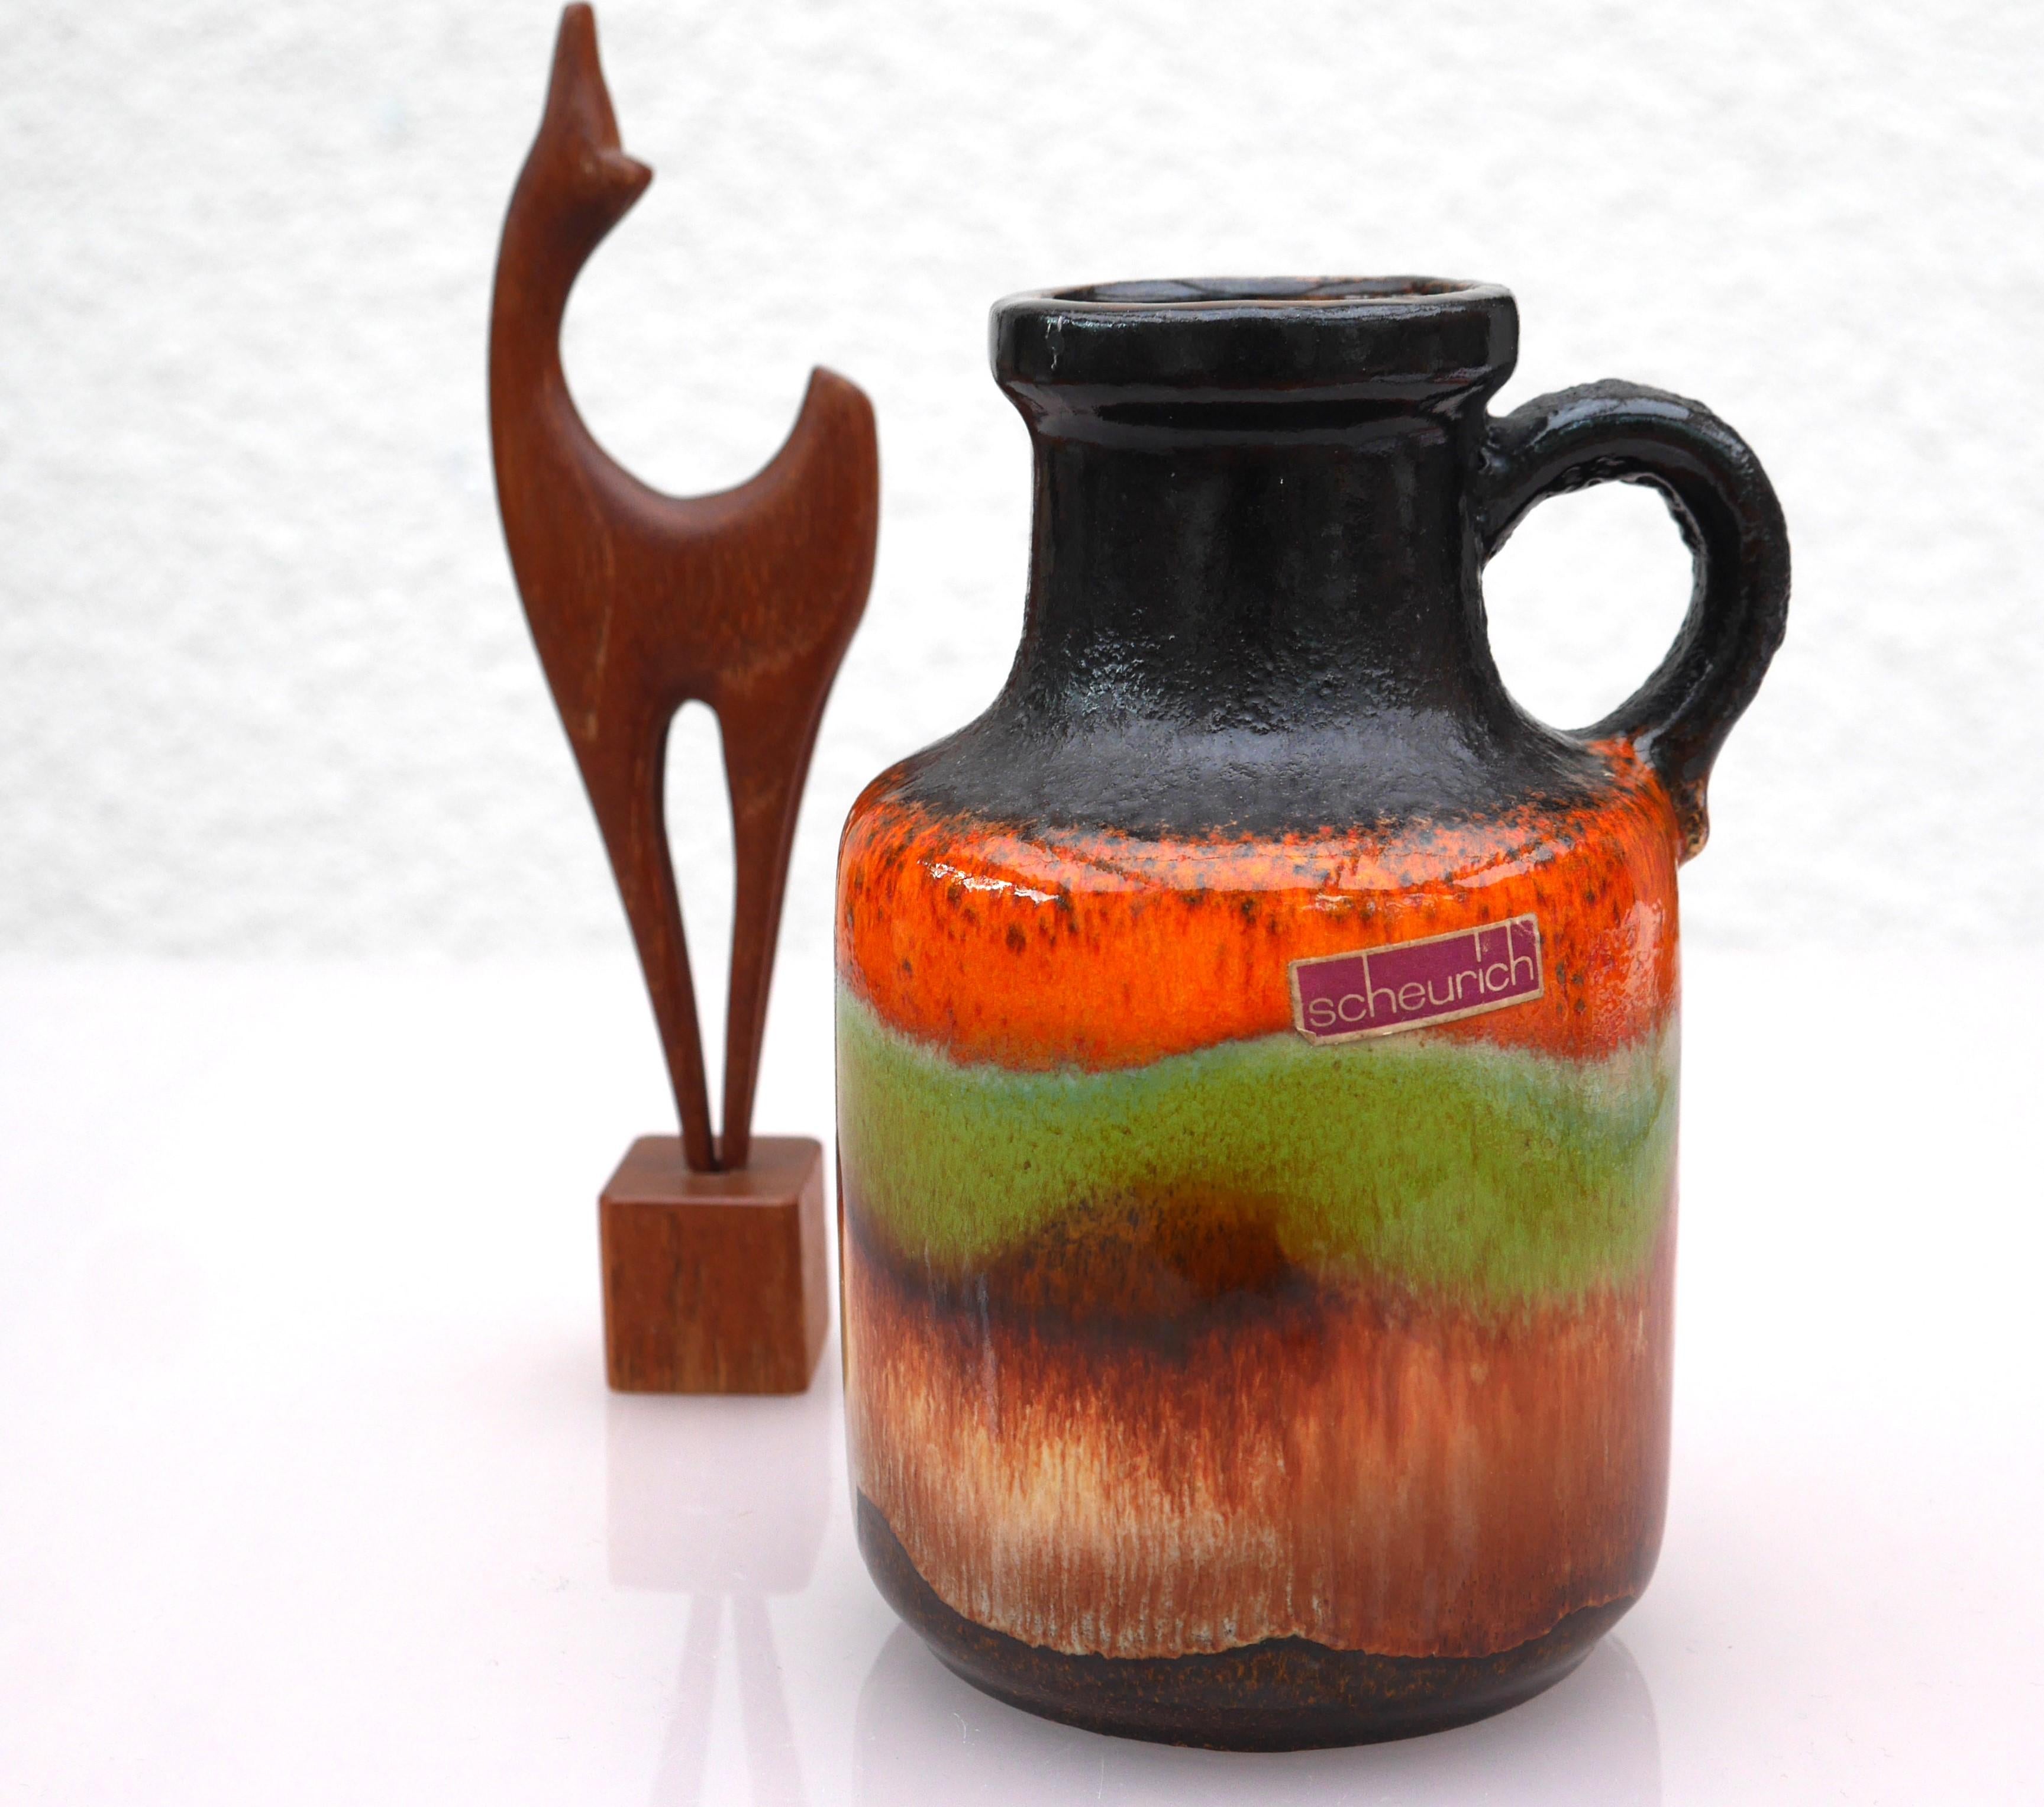 A one of a kind vintage fat lava ceramic vase from Scheurich. This vase is iconic in the shape and pattern as well as glazing with a dark brown nuance and red, orange and green details. This vase is very much of its time, yet still has a modern